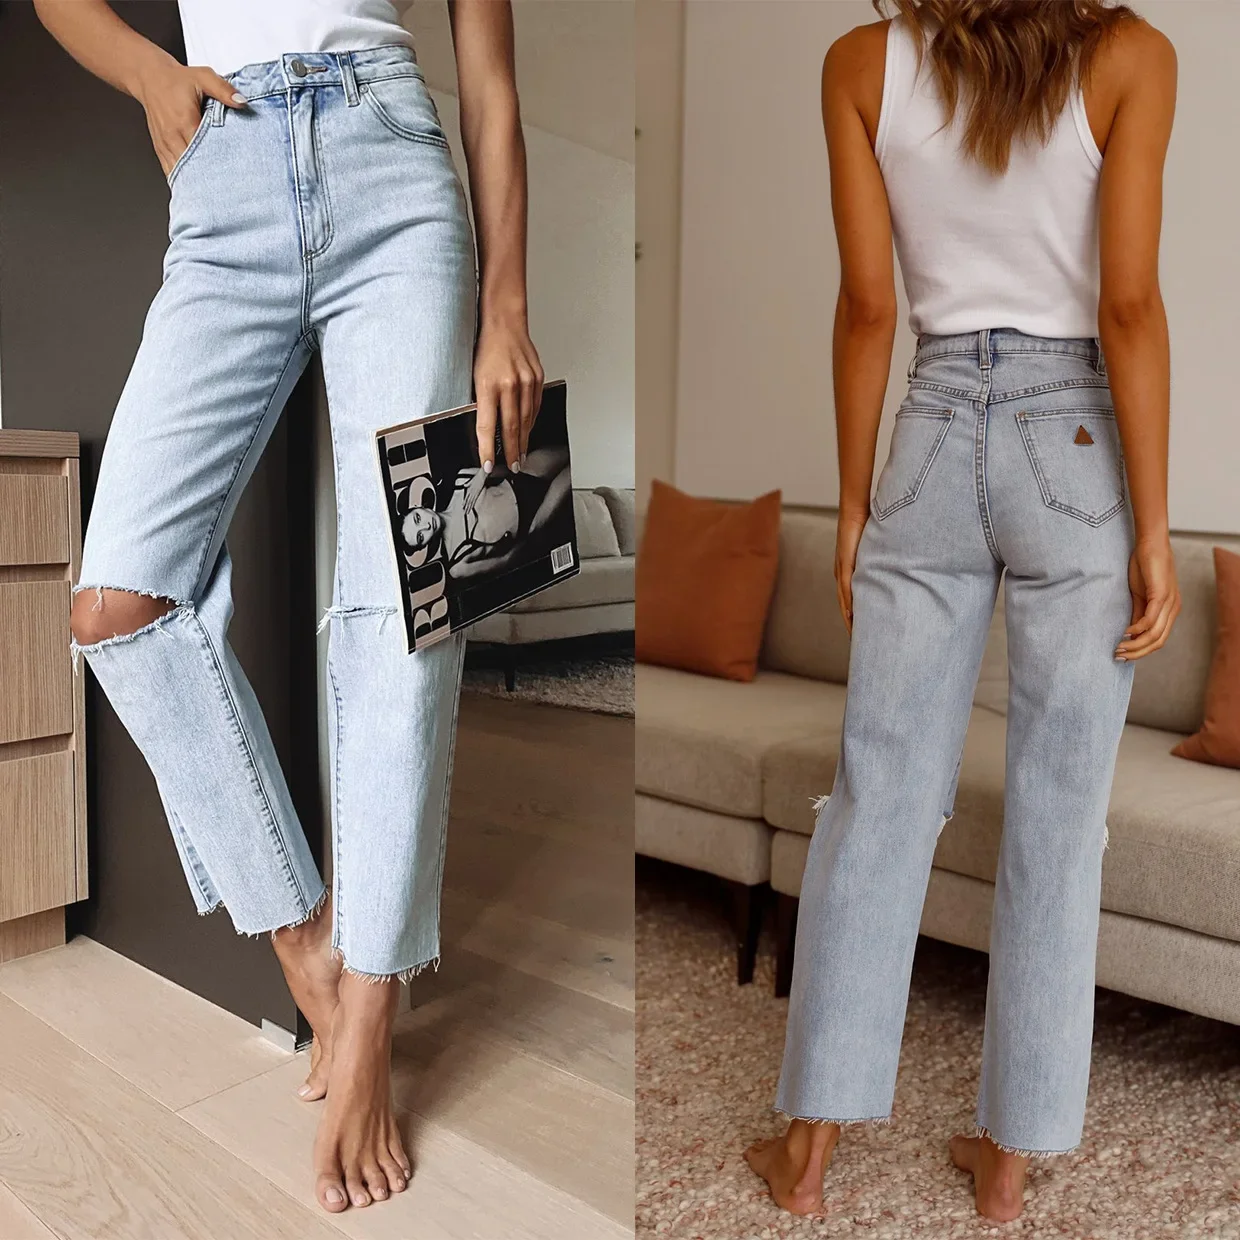 Light-Colored Straight High-Rise Ripped Jeans for Ladies, Temperament Commuter, New, Fall, Winter, 2023 2023 new spring summer fashion elegant one button thin suit jacket ladies temperament slimming commuter thin lace top